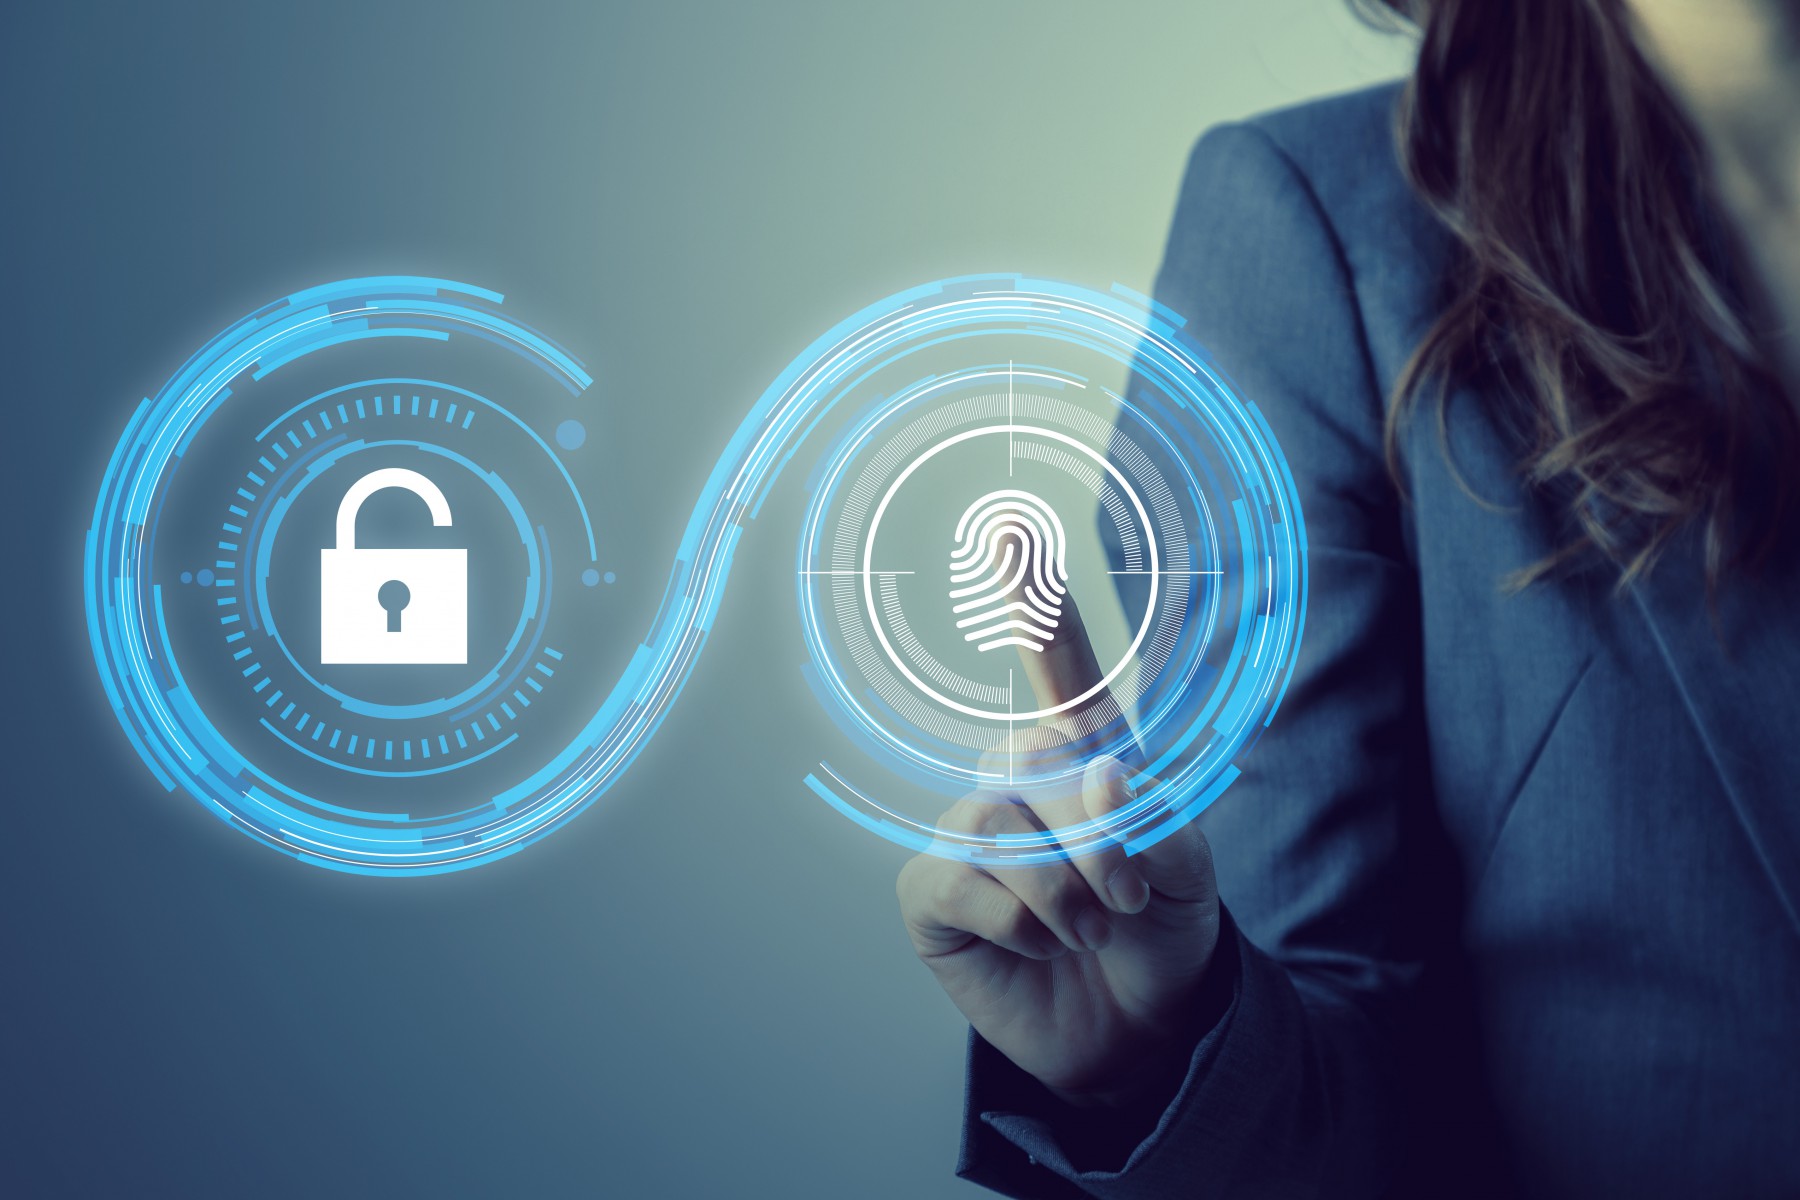 The Out-of-Band (OOB) Authentication Market is estimated to be valued at US$ 553.45 million in 2020 and is expected to exhibit a CAGR of 22.8% over the forecast period 2021-2030